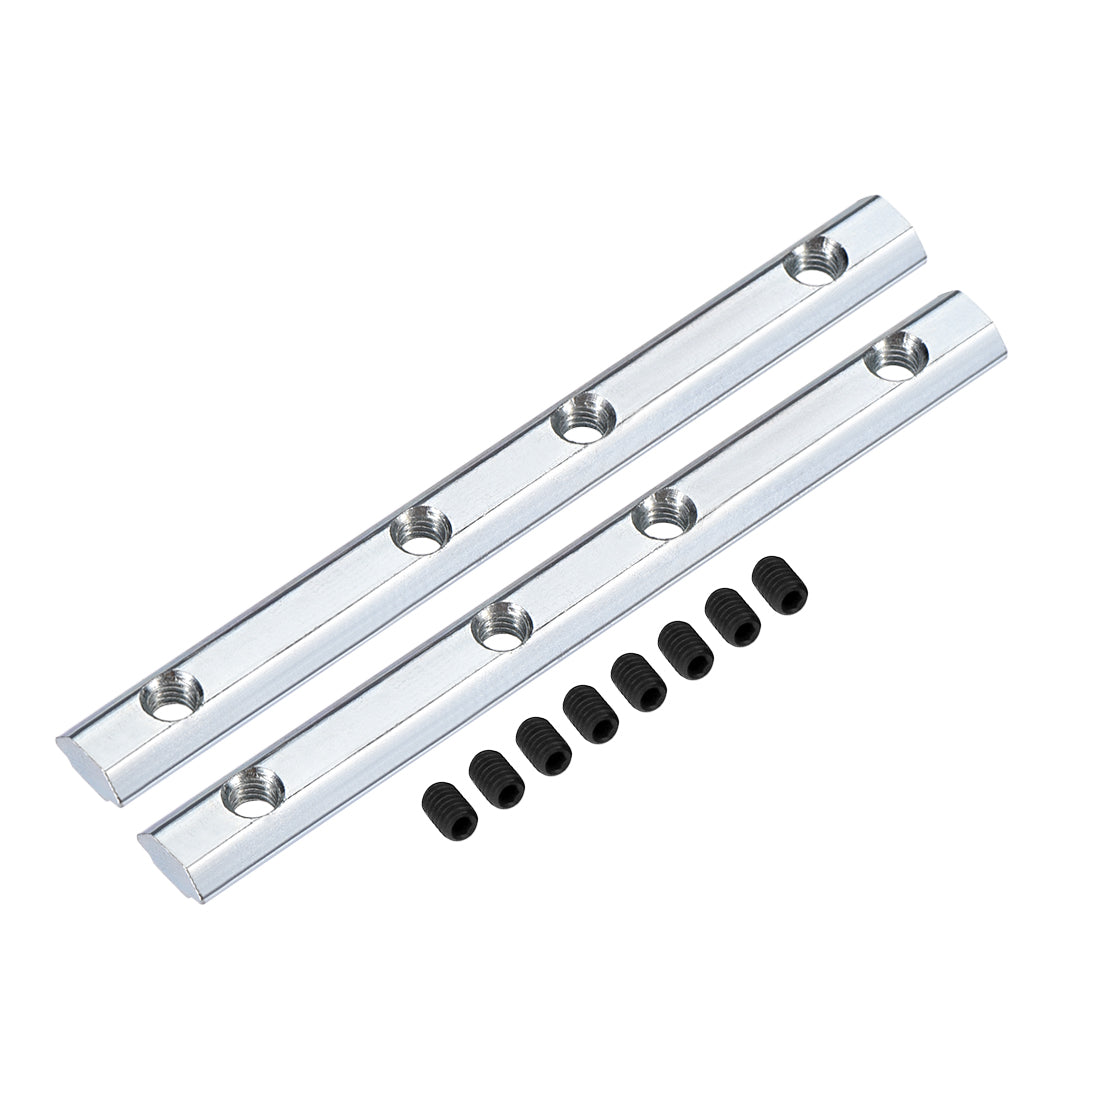 uxcell Uxcell Straight Line Connector, 3.9 Inch Joint Bracket with Screws for 2020 Series T Slot 6mm Aluminum Extrusion Profile, 2 Pcs